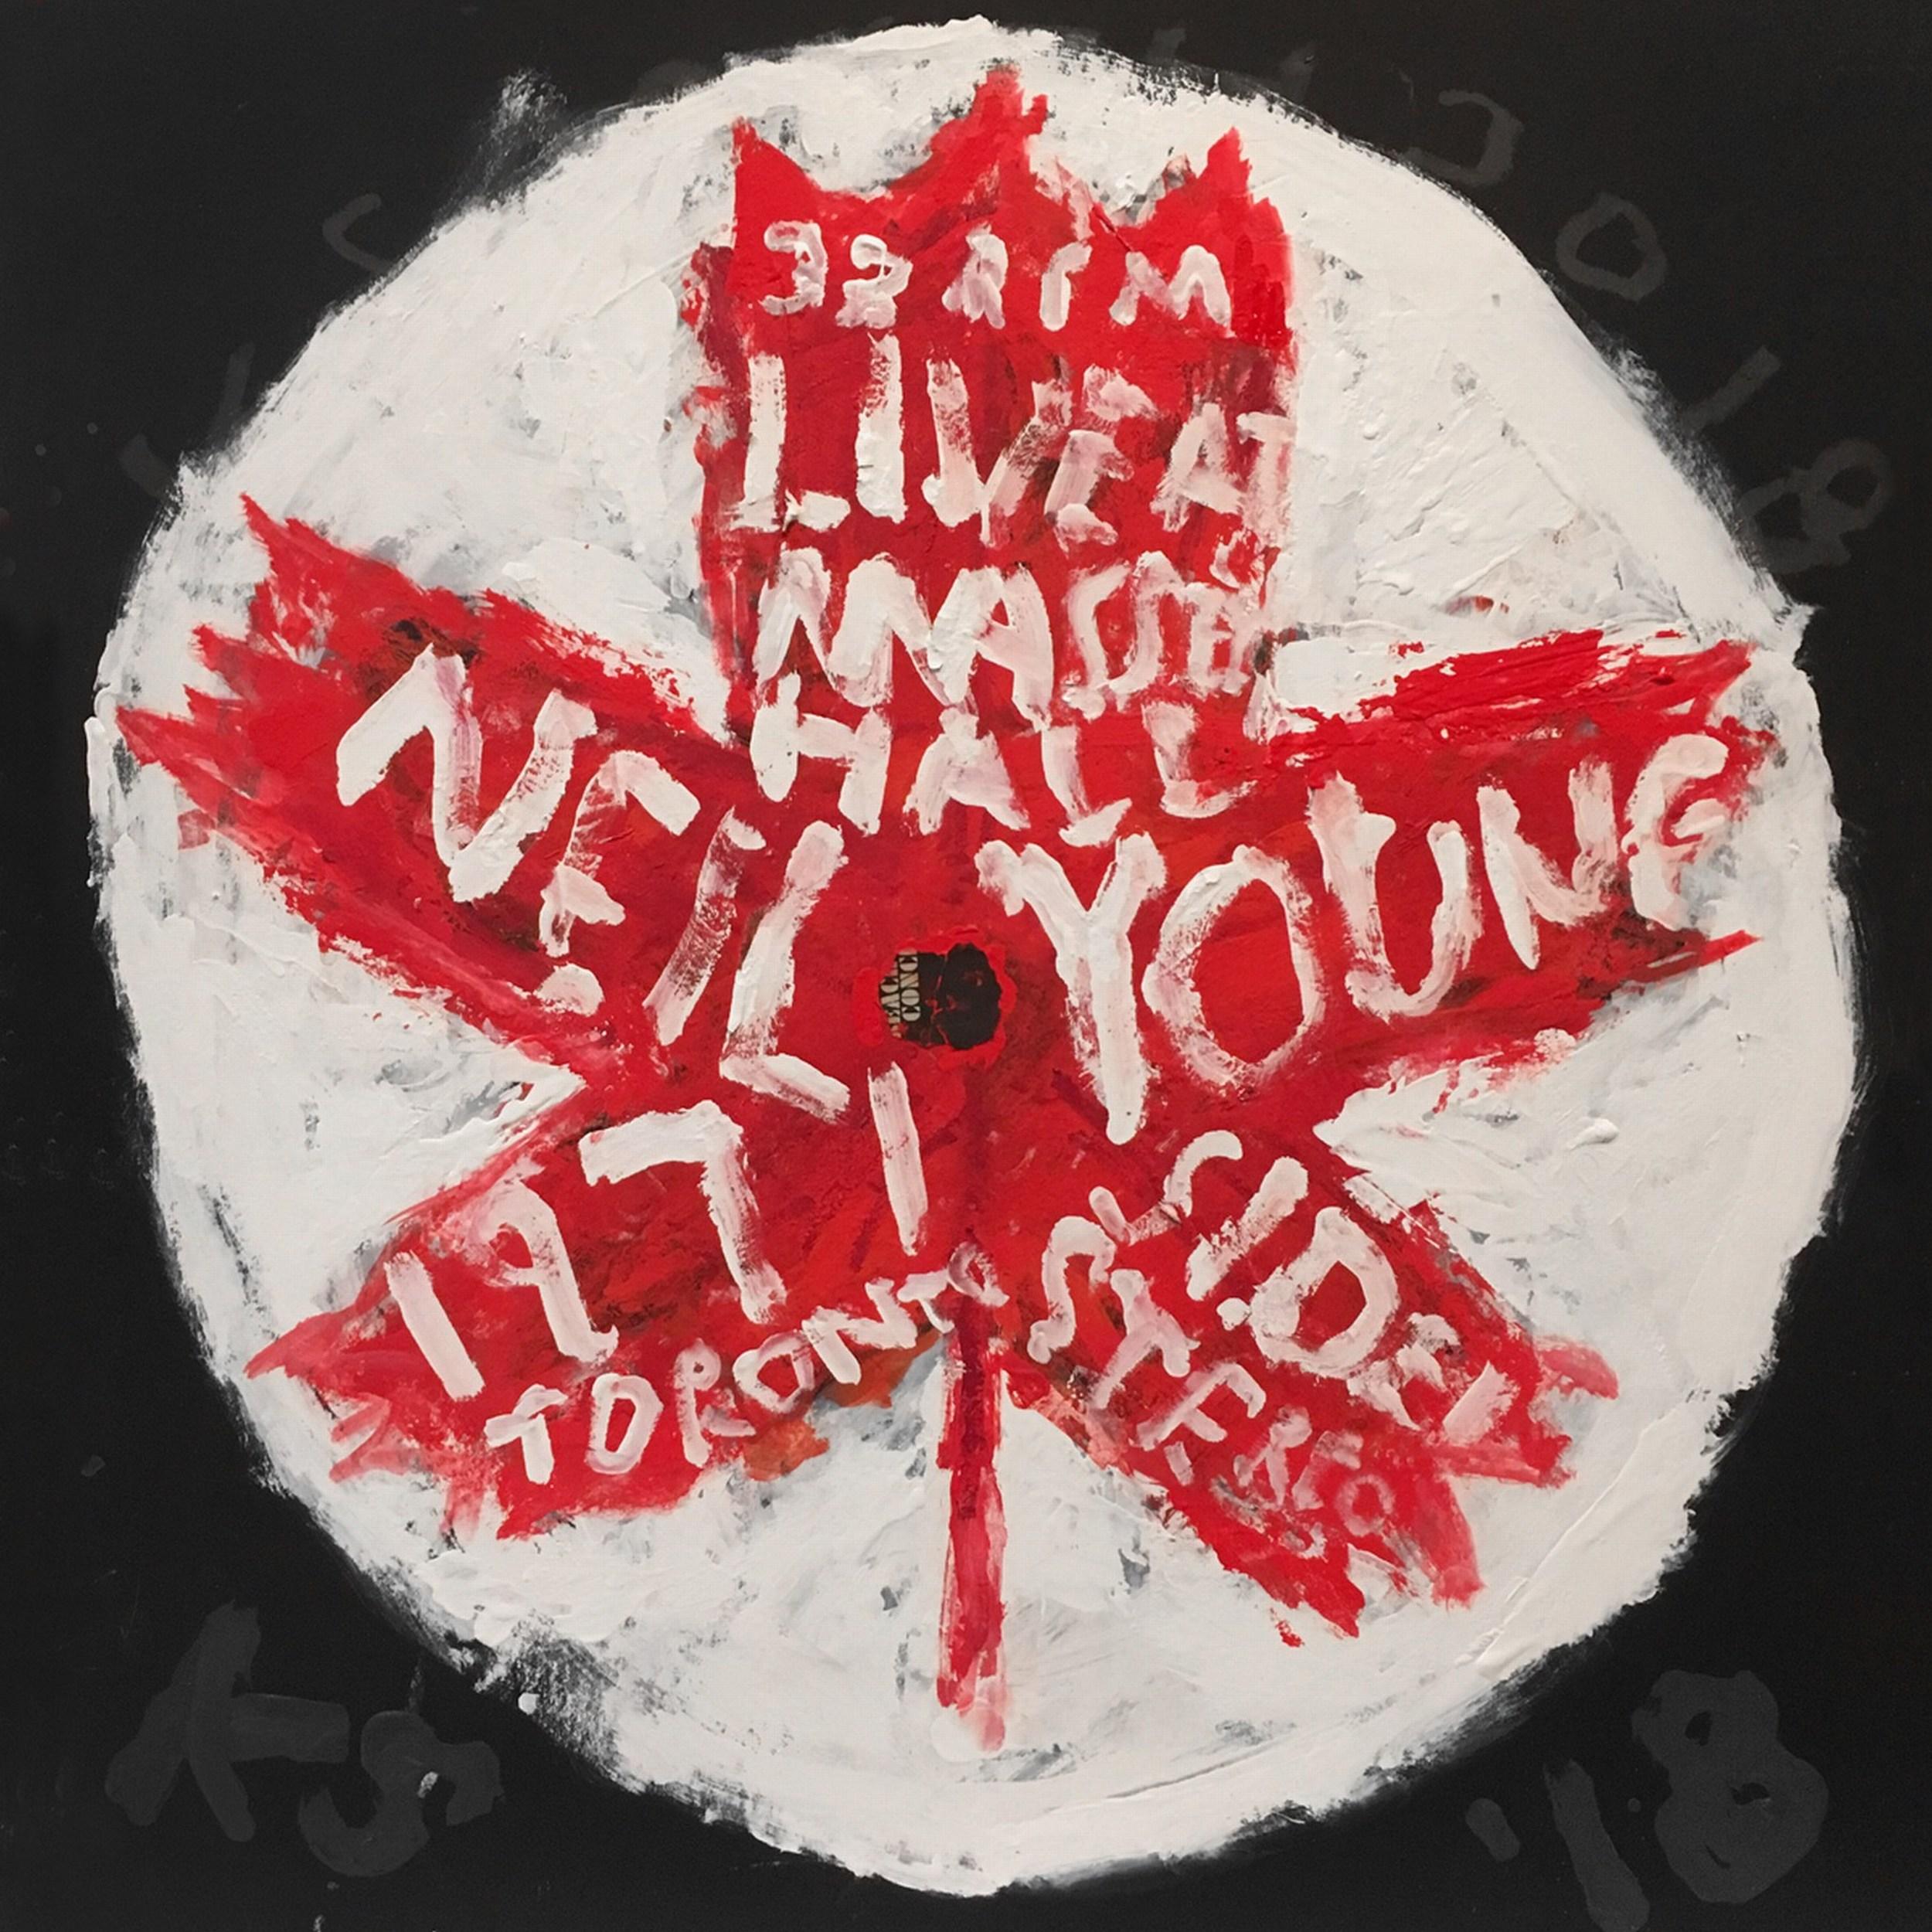 Neil Young at Massey Hall (Grammy, Album Art, Iconic, Music, Rock and Roll)